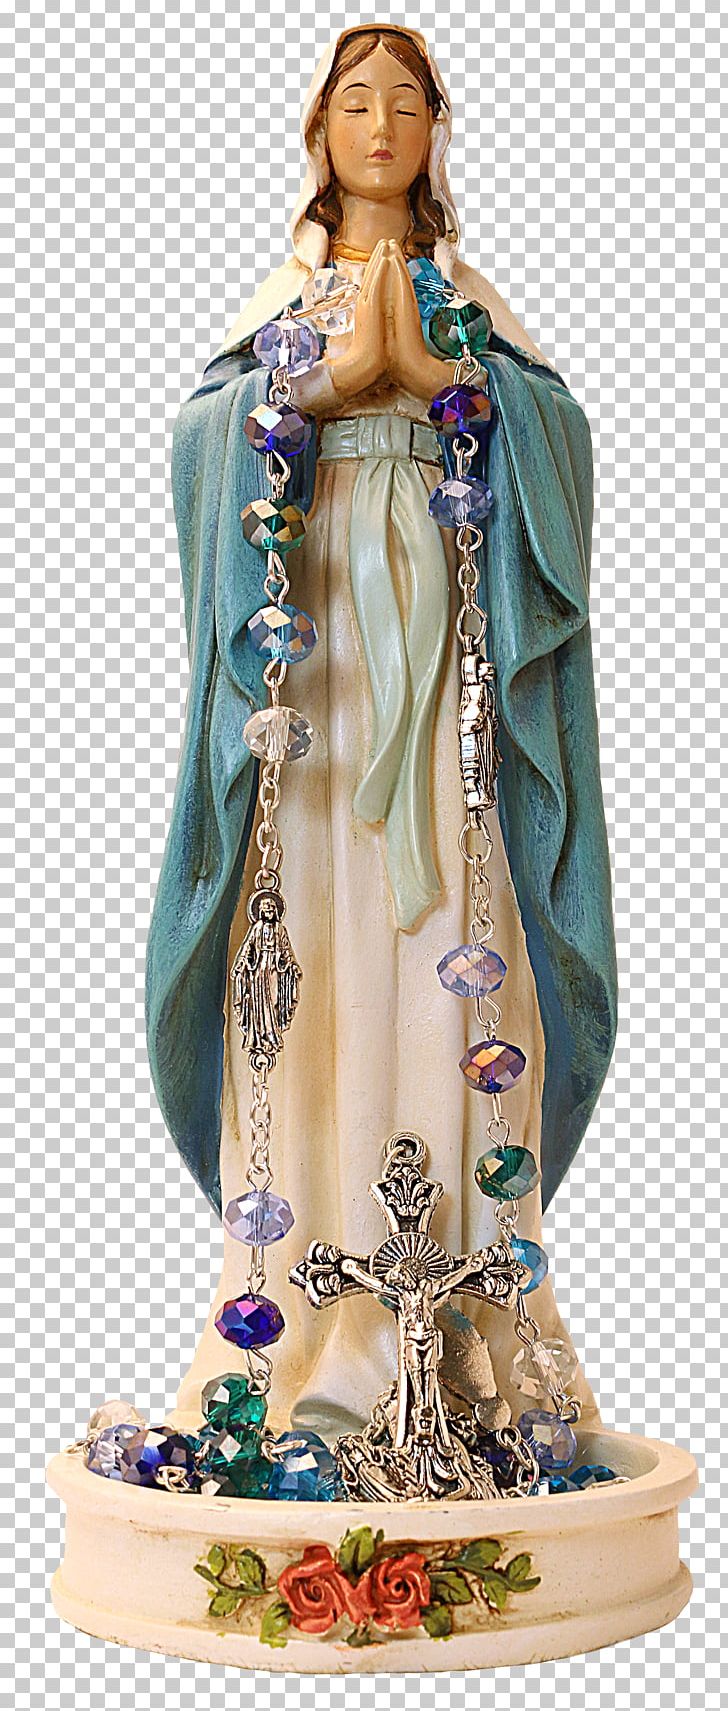 Mary Statue Madonna And Child Our Lady Of Guadalupe Rosary PNG, Clipart, Costume Design, Drawing, Figurine, Immaculate Conception, Madonna And Child Free PNG Download